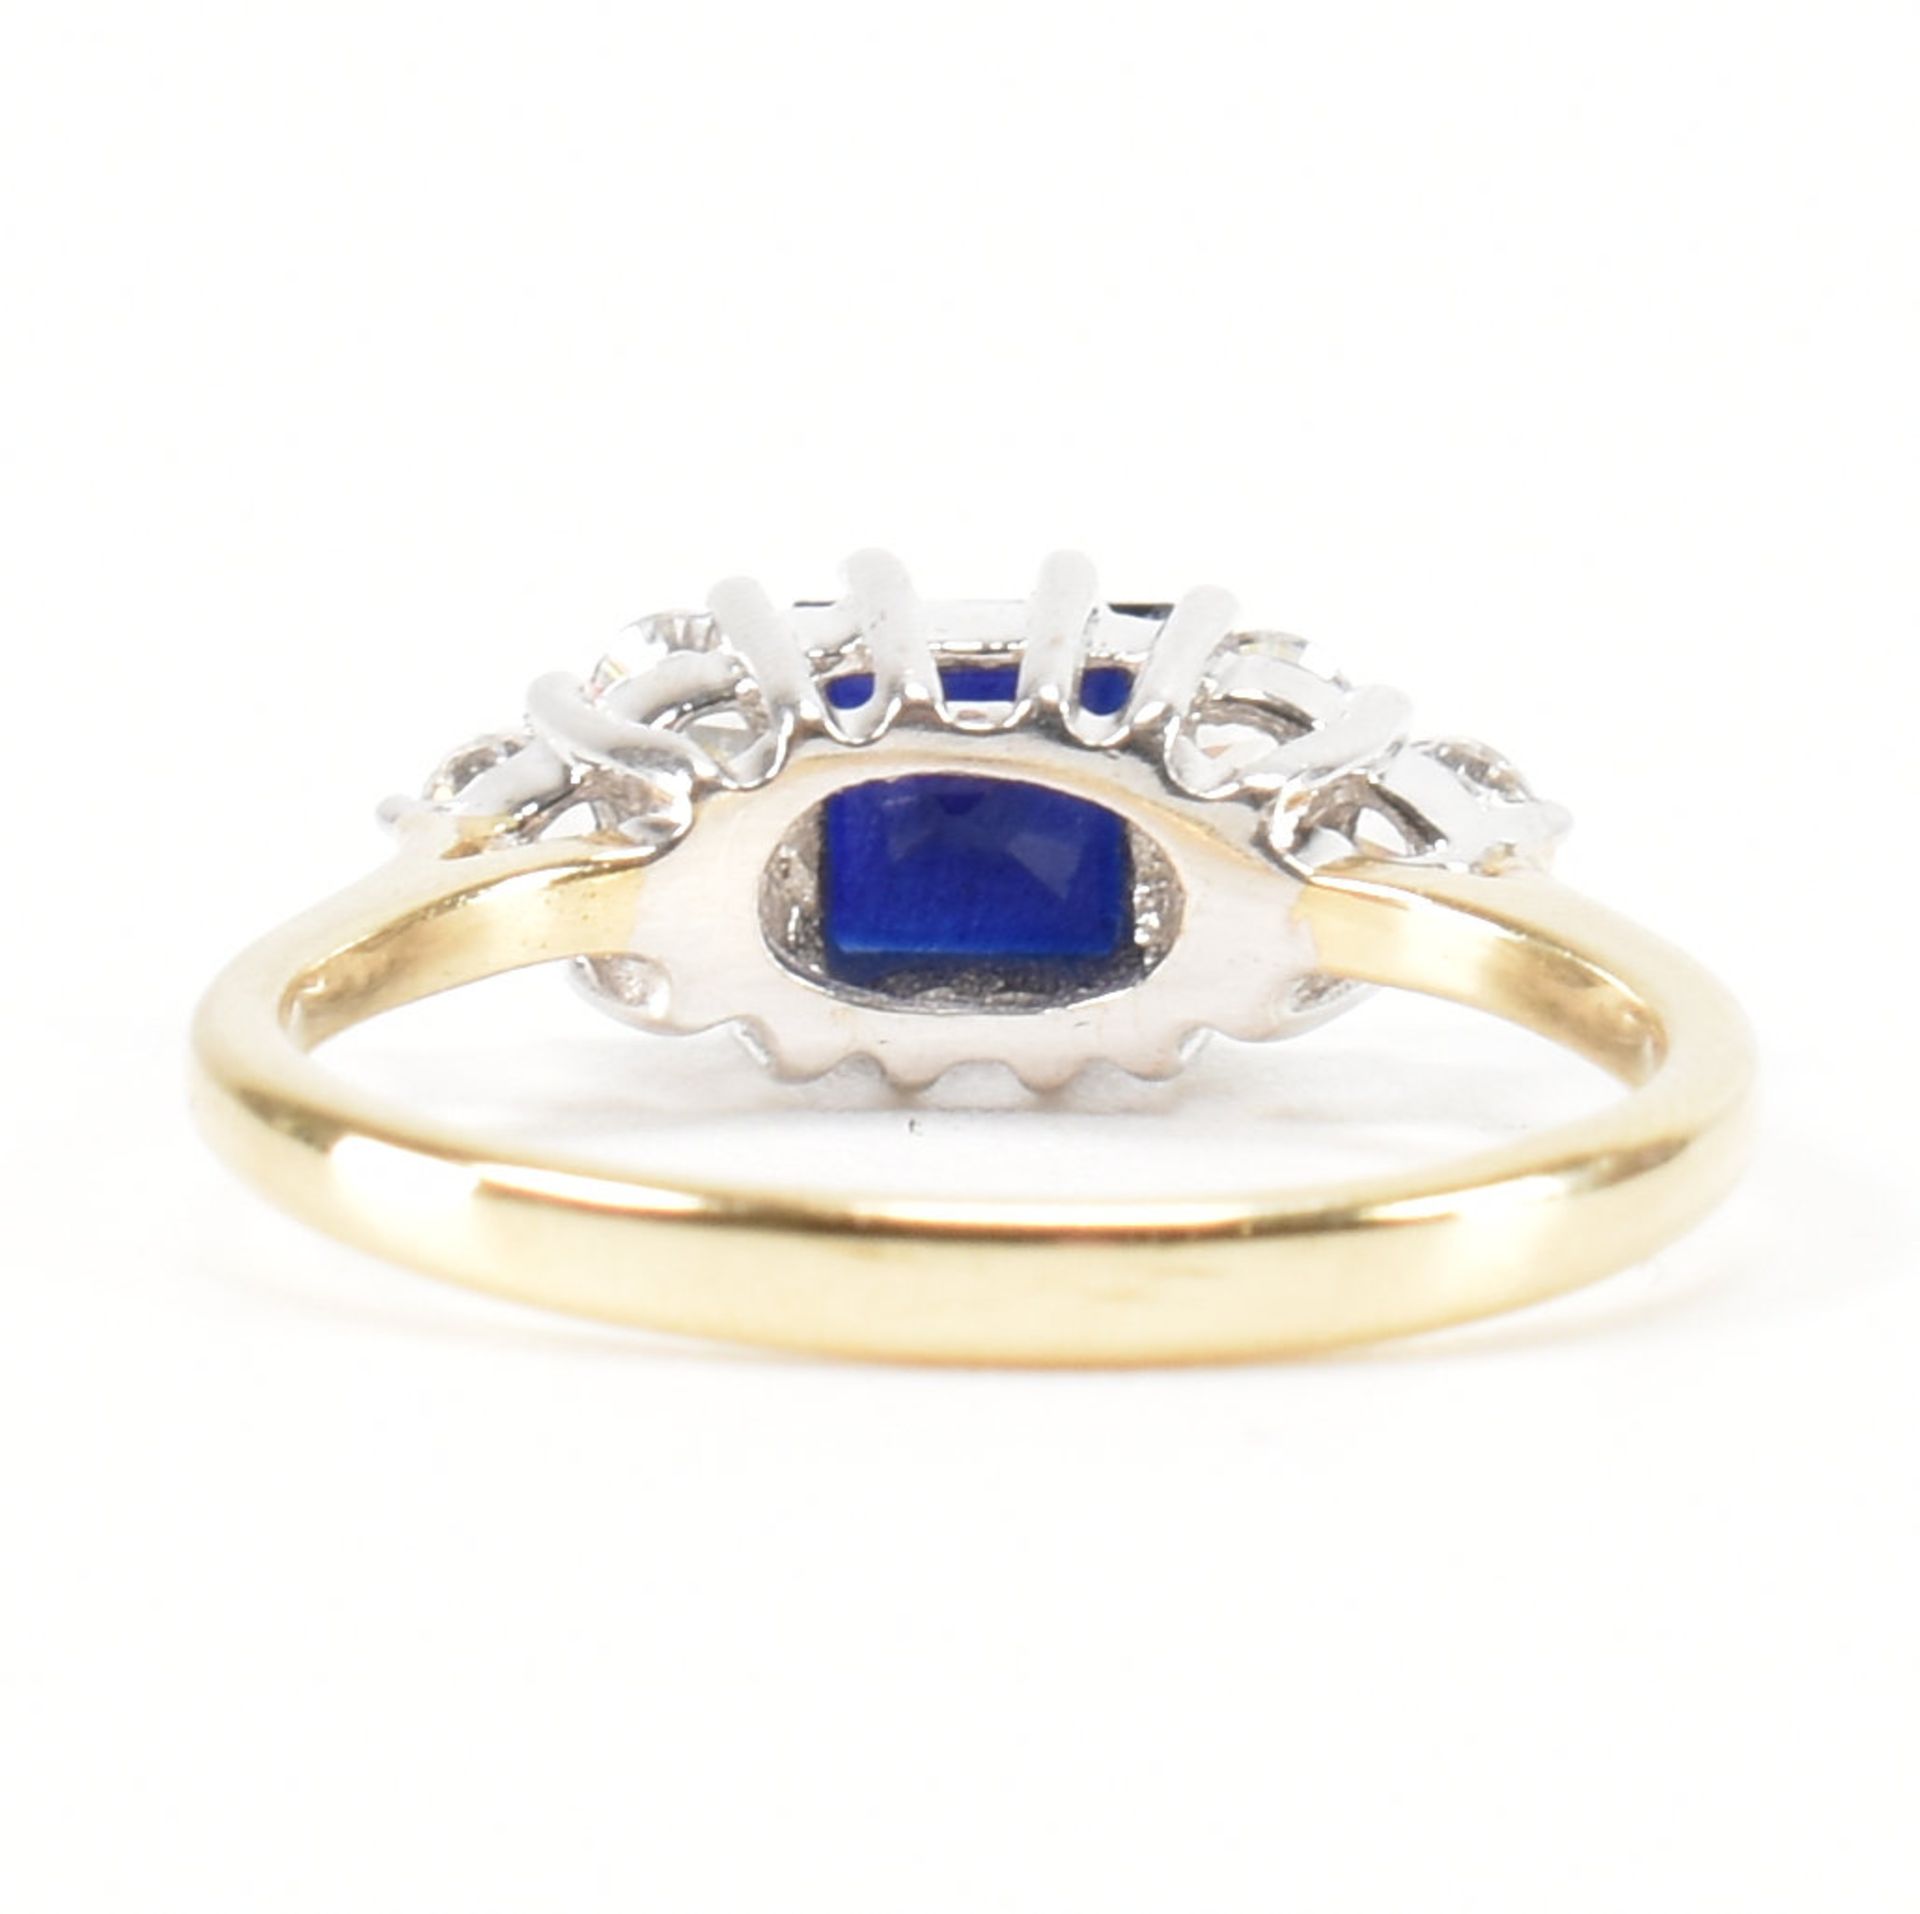 HALLMARKED 9CT GOLD SYNTHETIC SAPPHIRE & CZ RING - Image 3 of 9